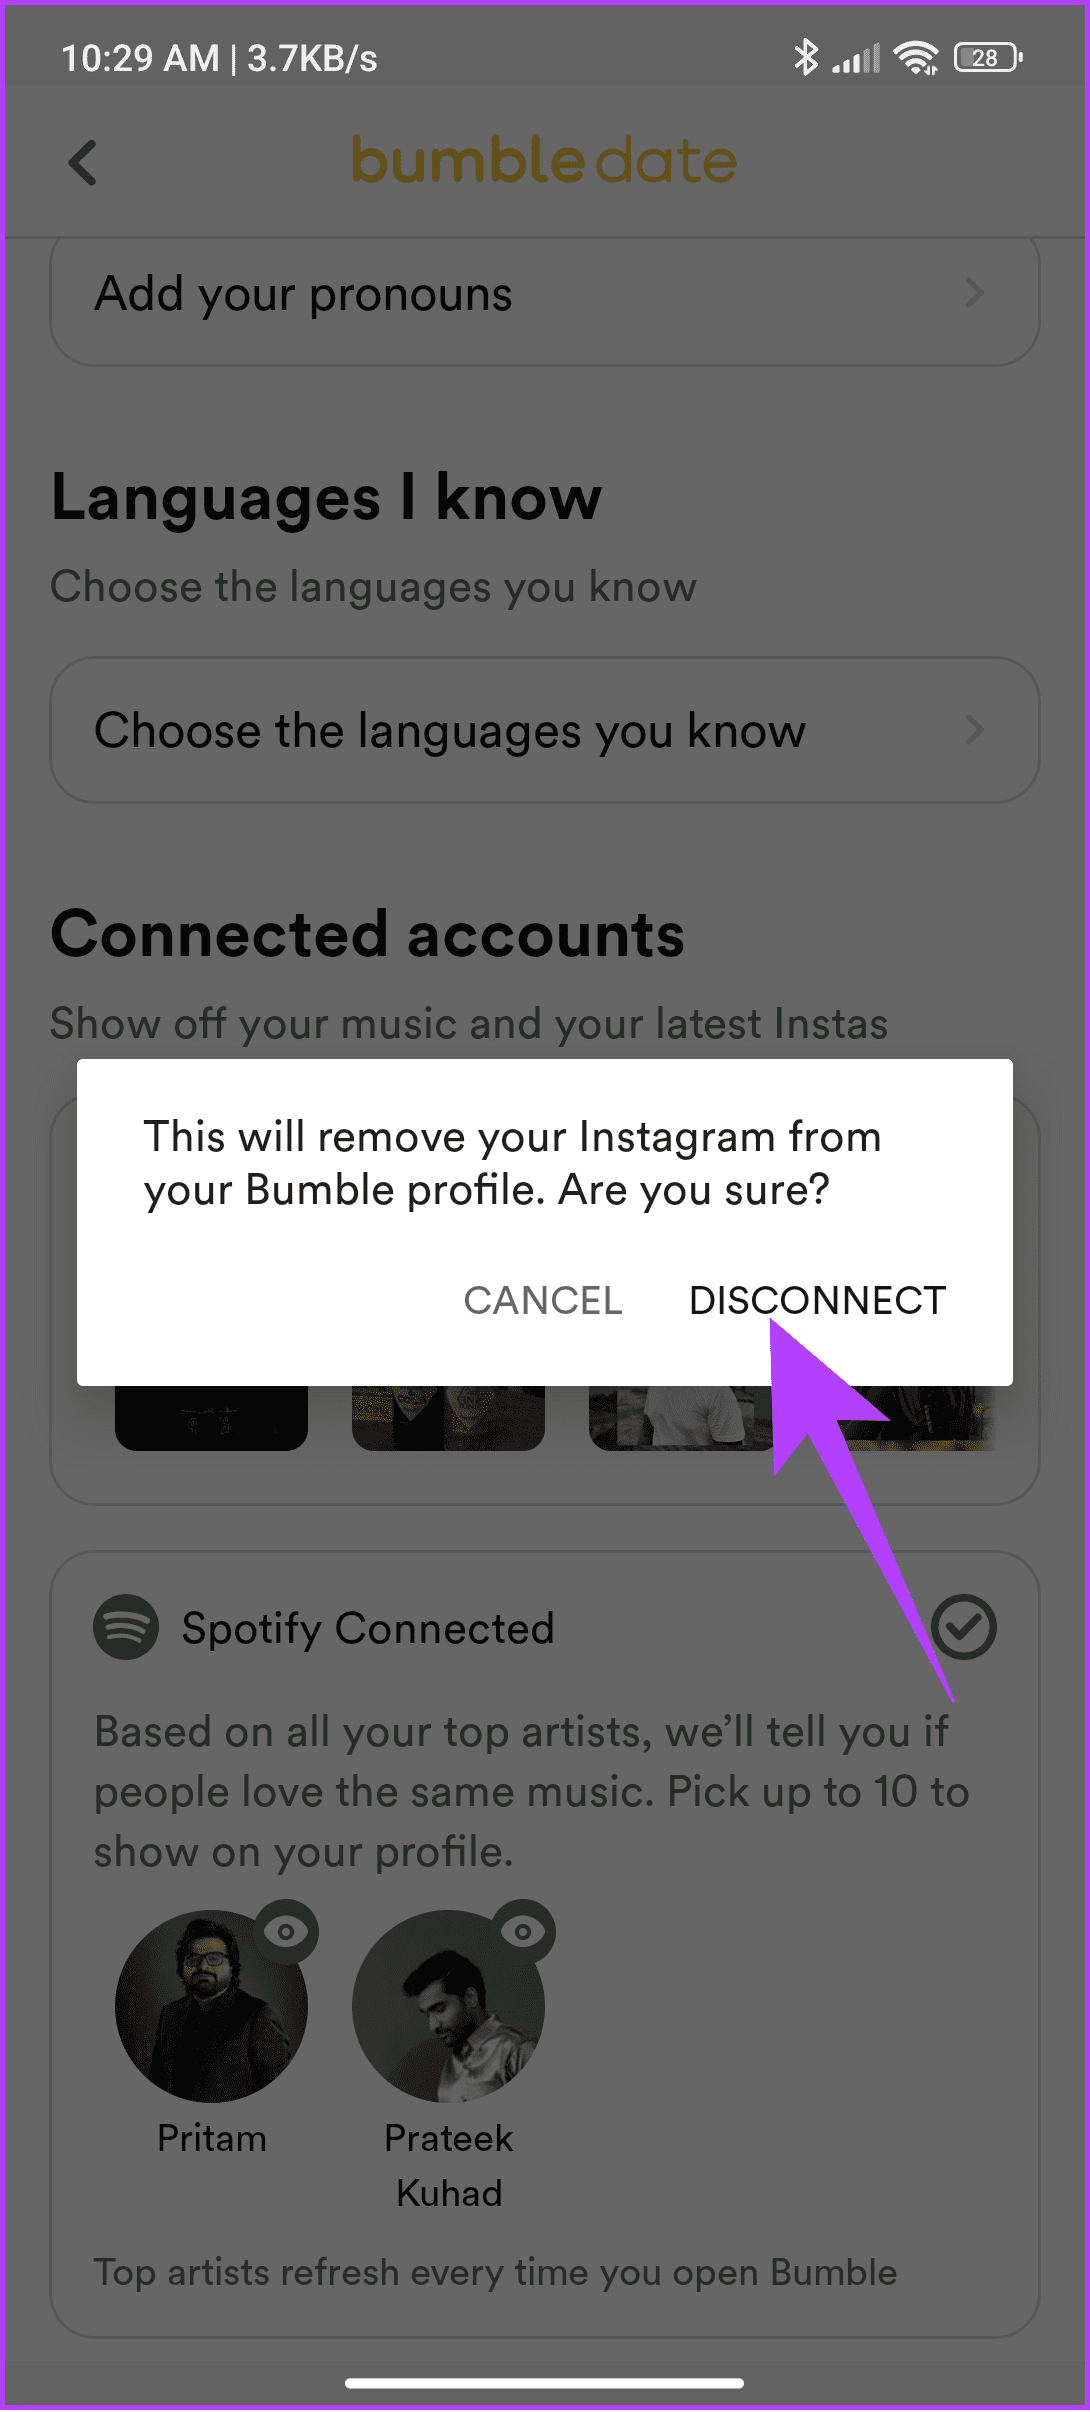 Select disconnected